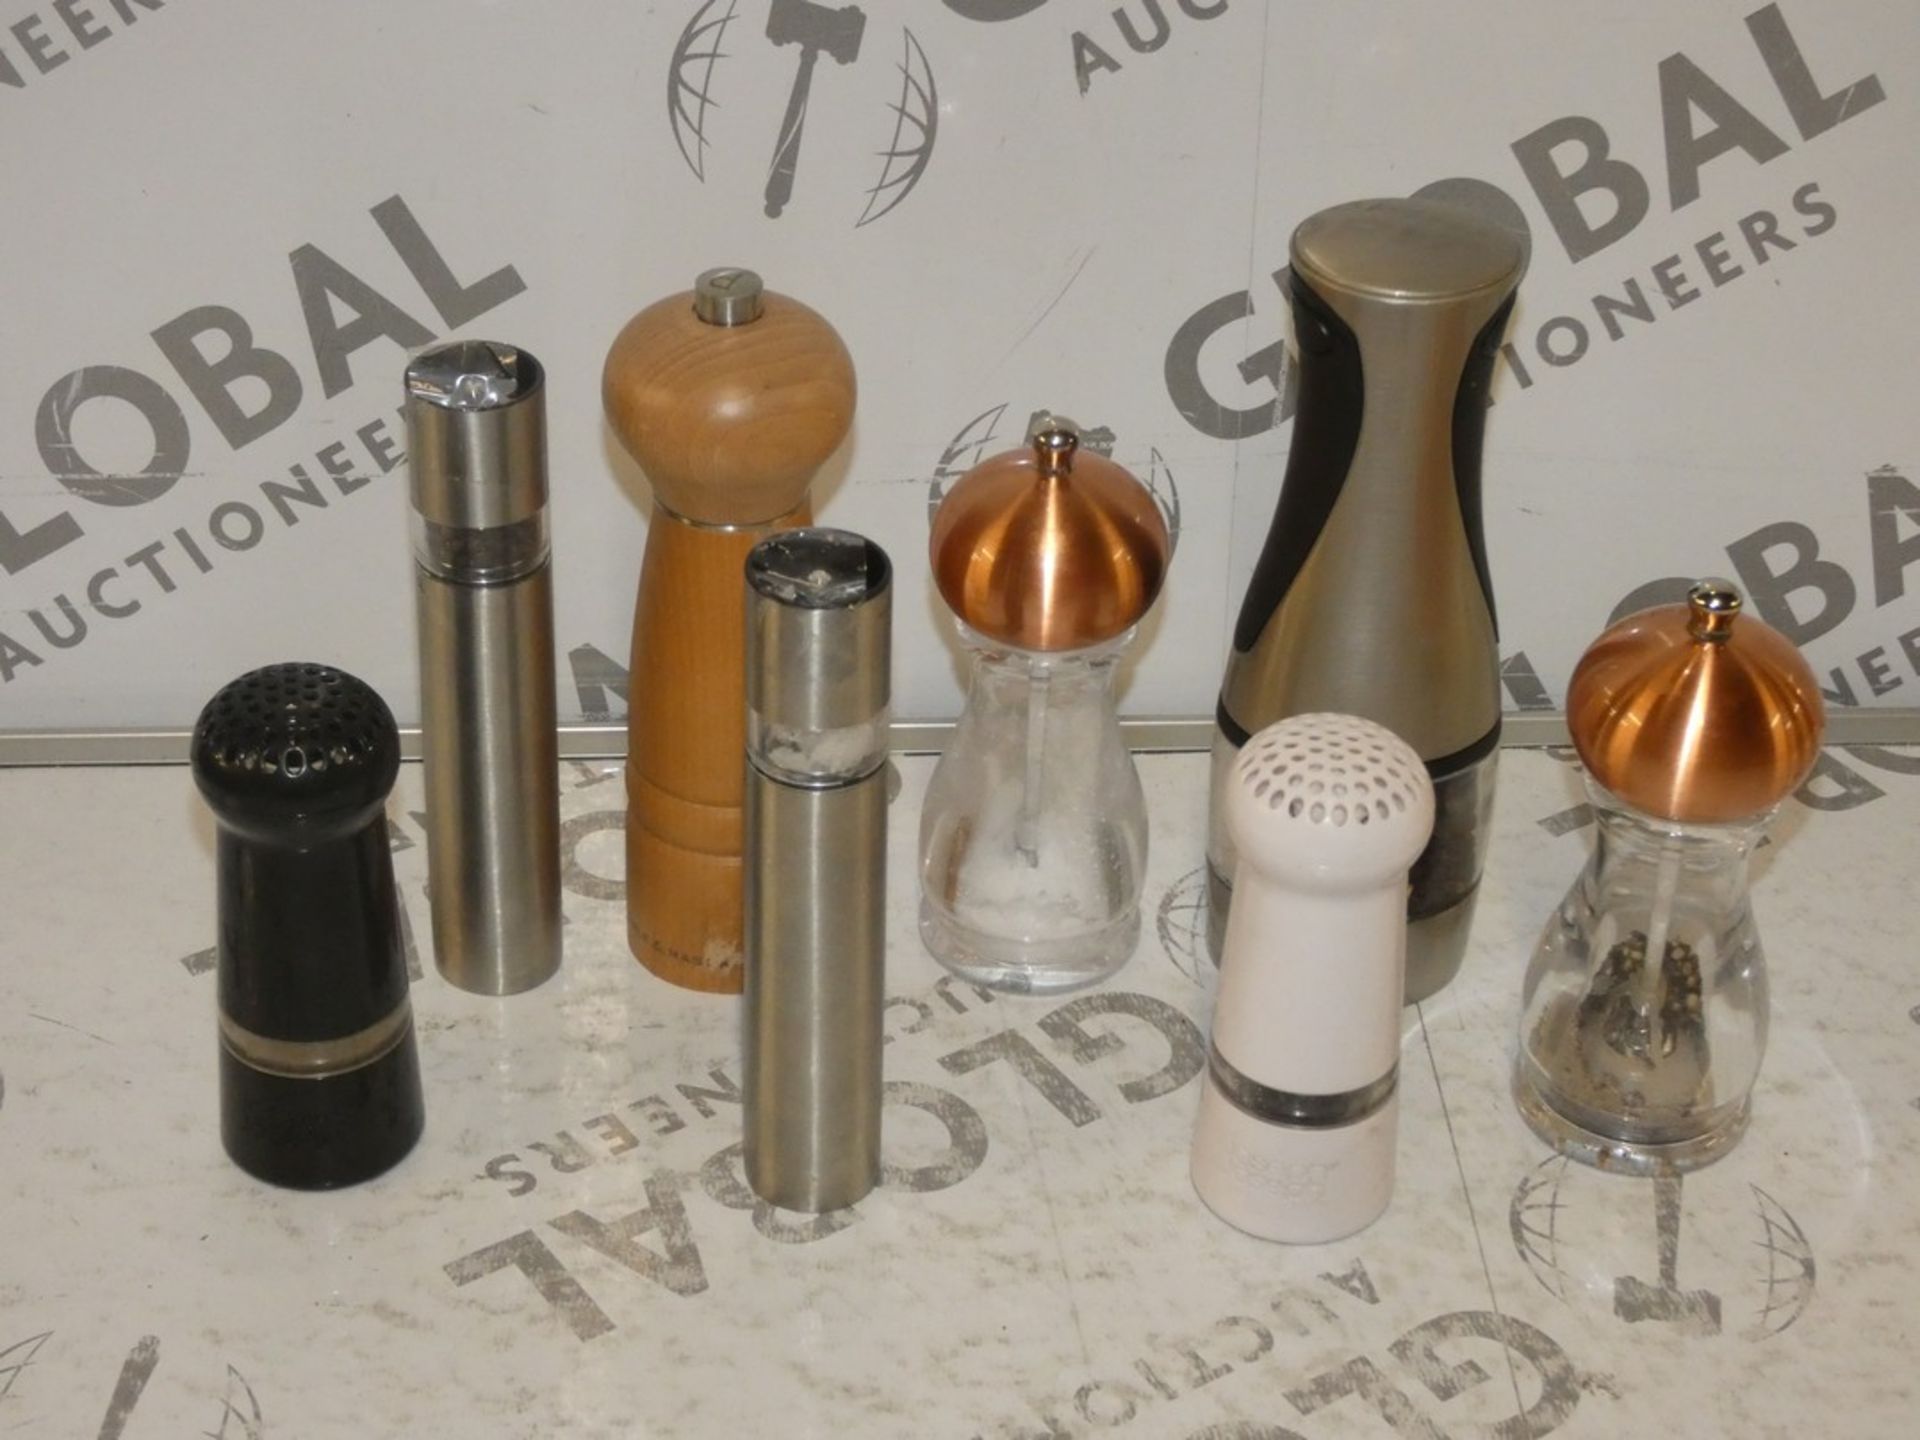 Assorted Items to Include 4 Cole and Mason Salt and Pepper Mills and 1 Joseph Joseph Salt and Pepper